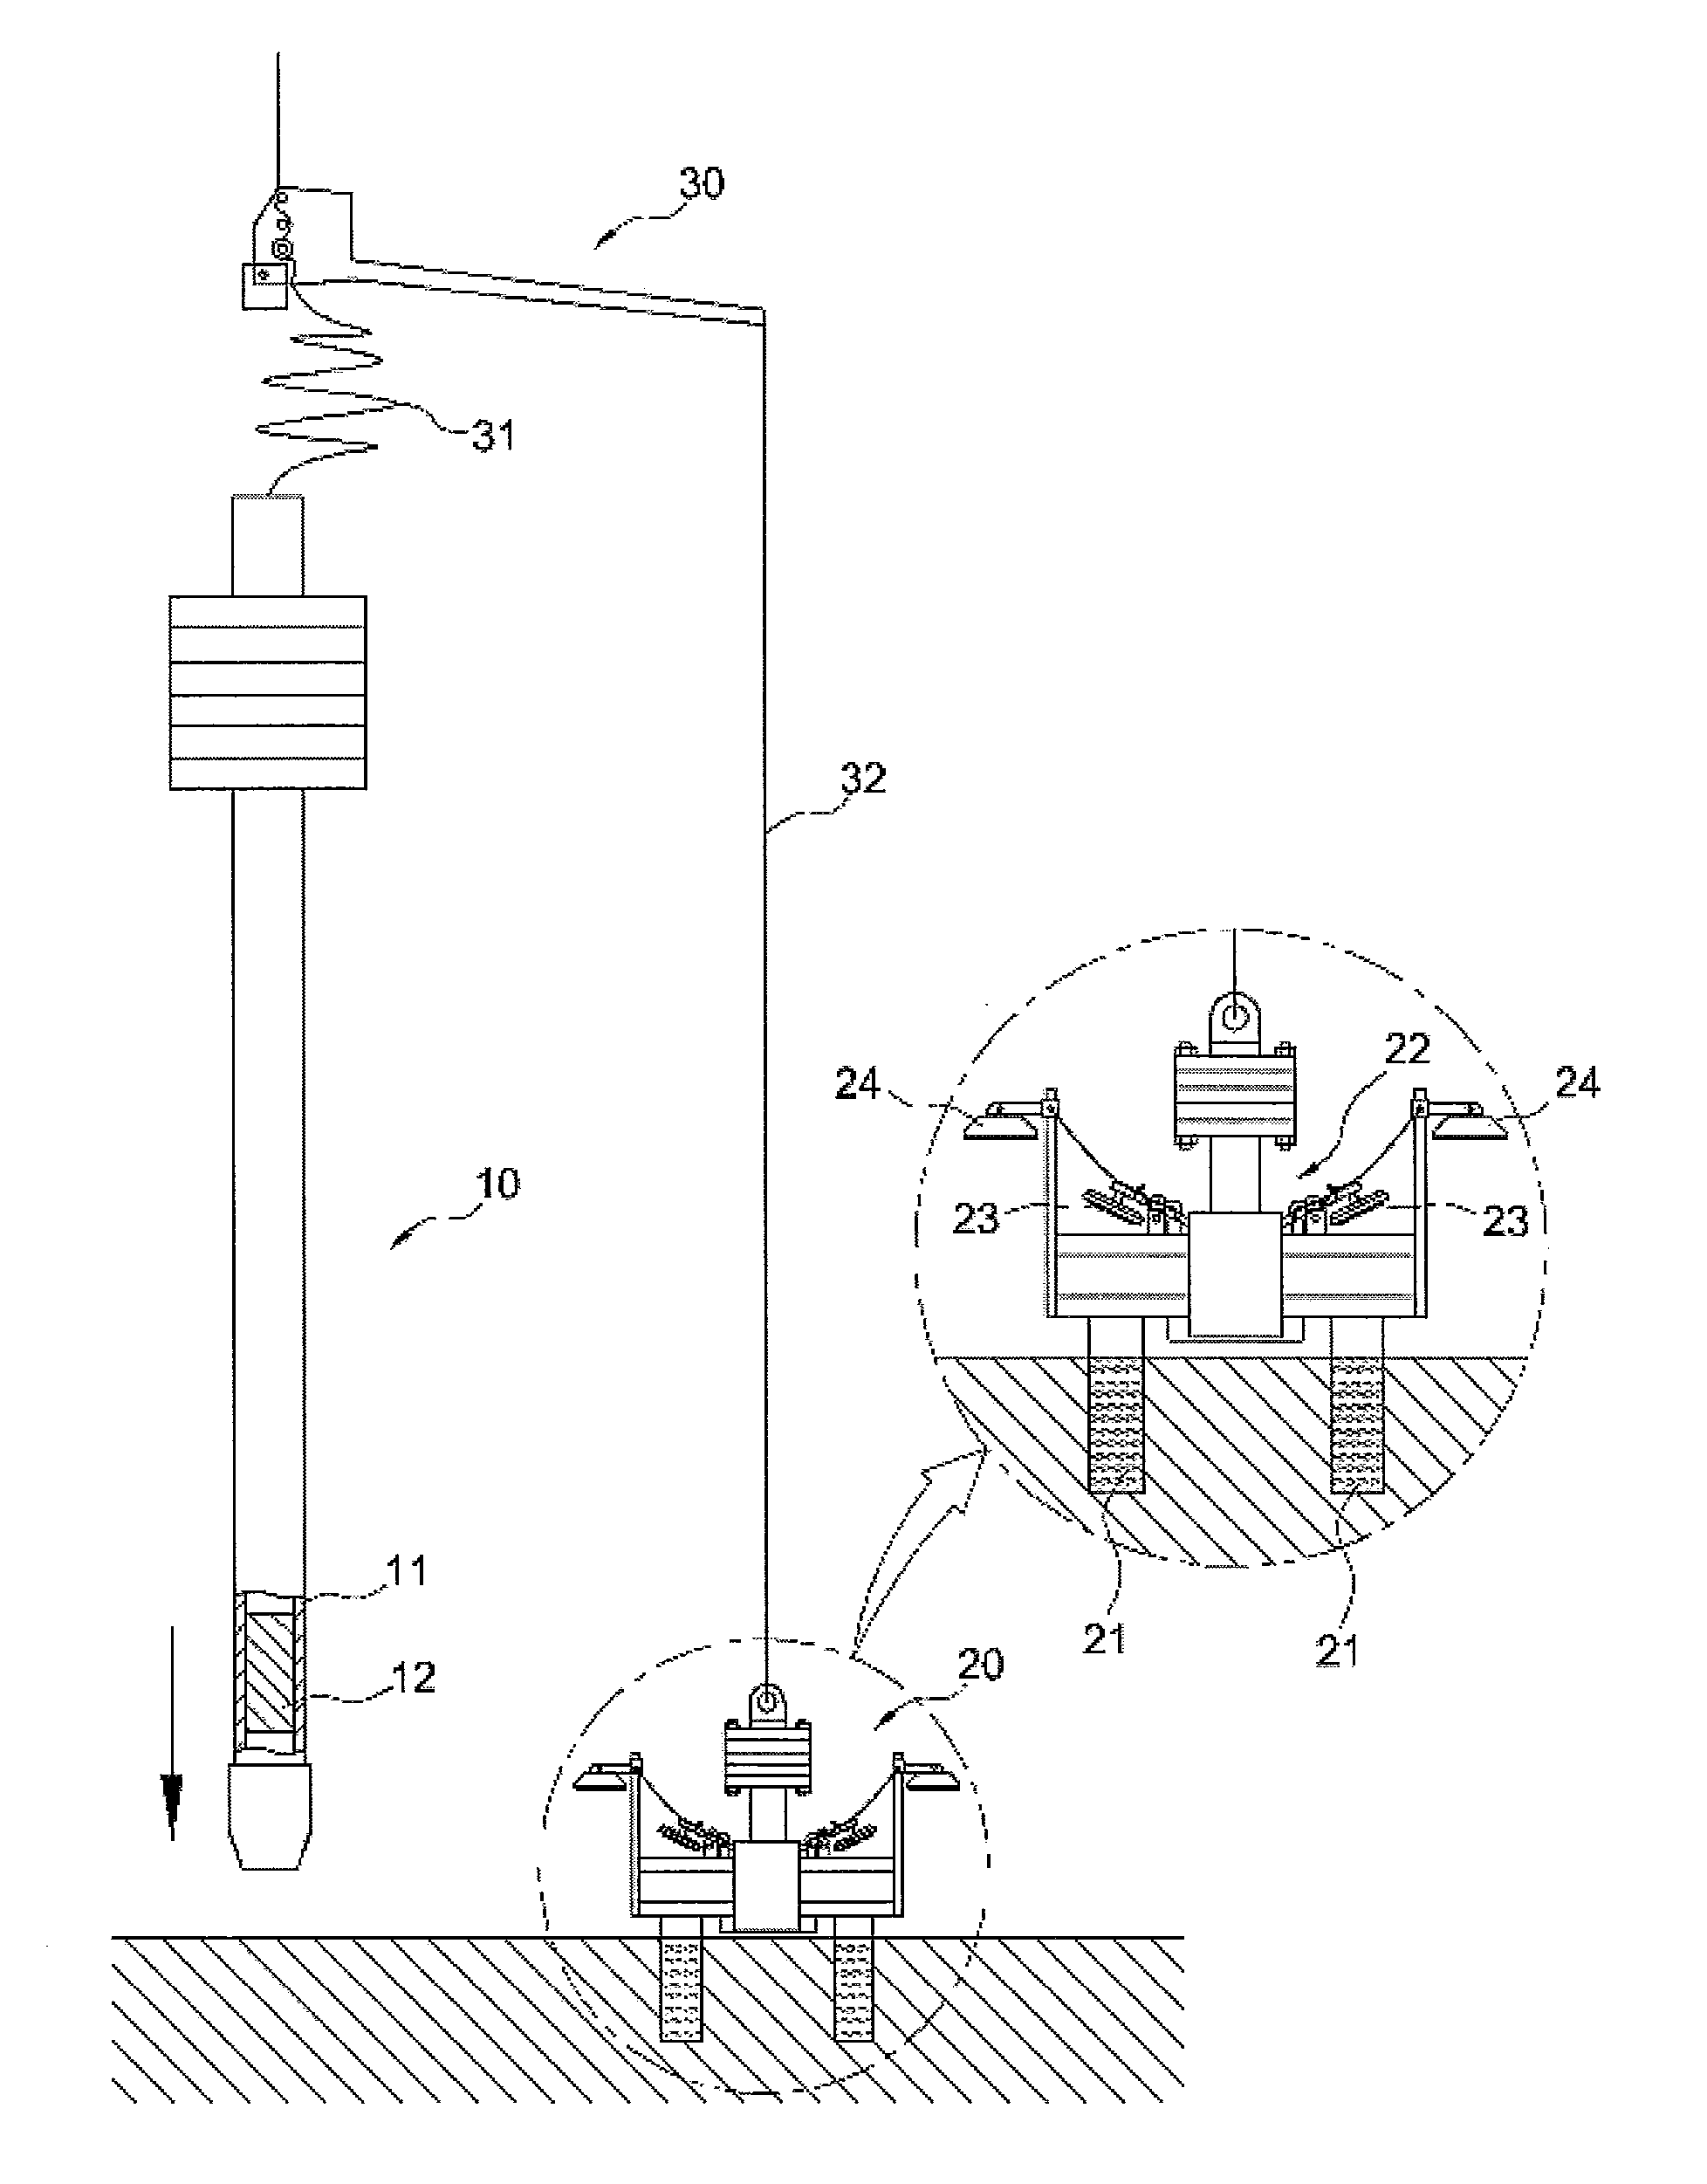 Apparatus for Collecting Marine Deposits